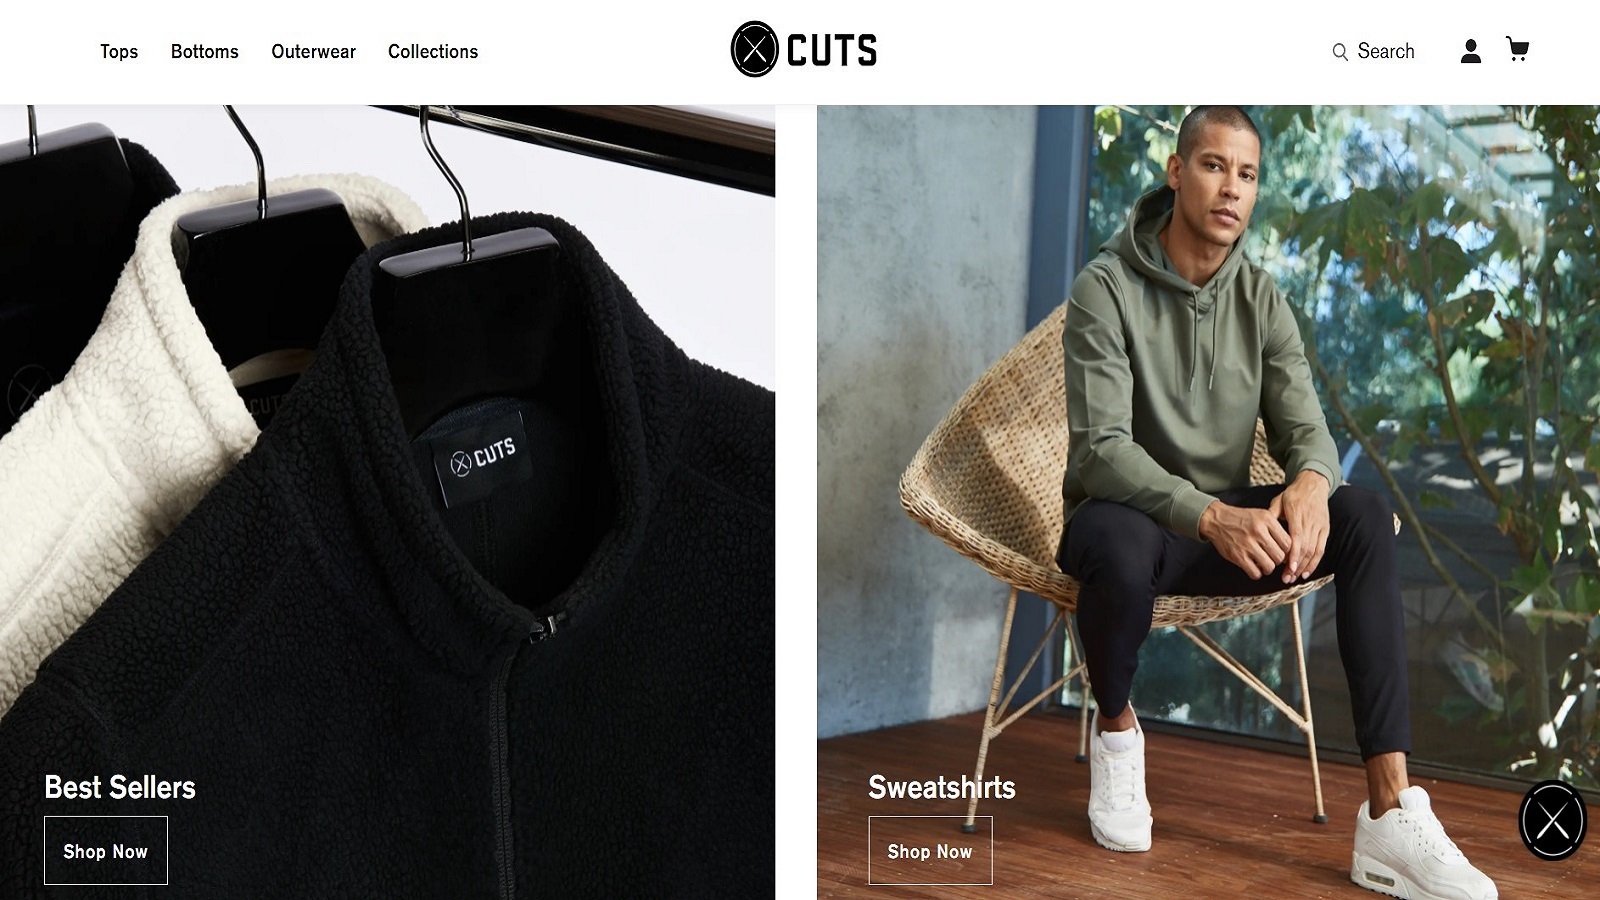 Cuts Clothing Review: *Pros and Cons* Does It Worth to Buy?